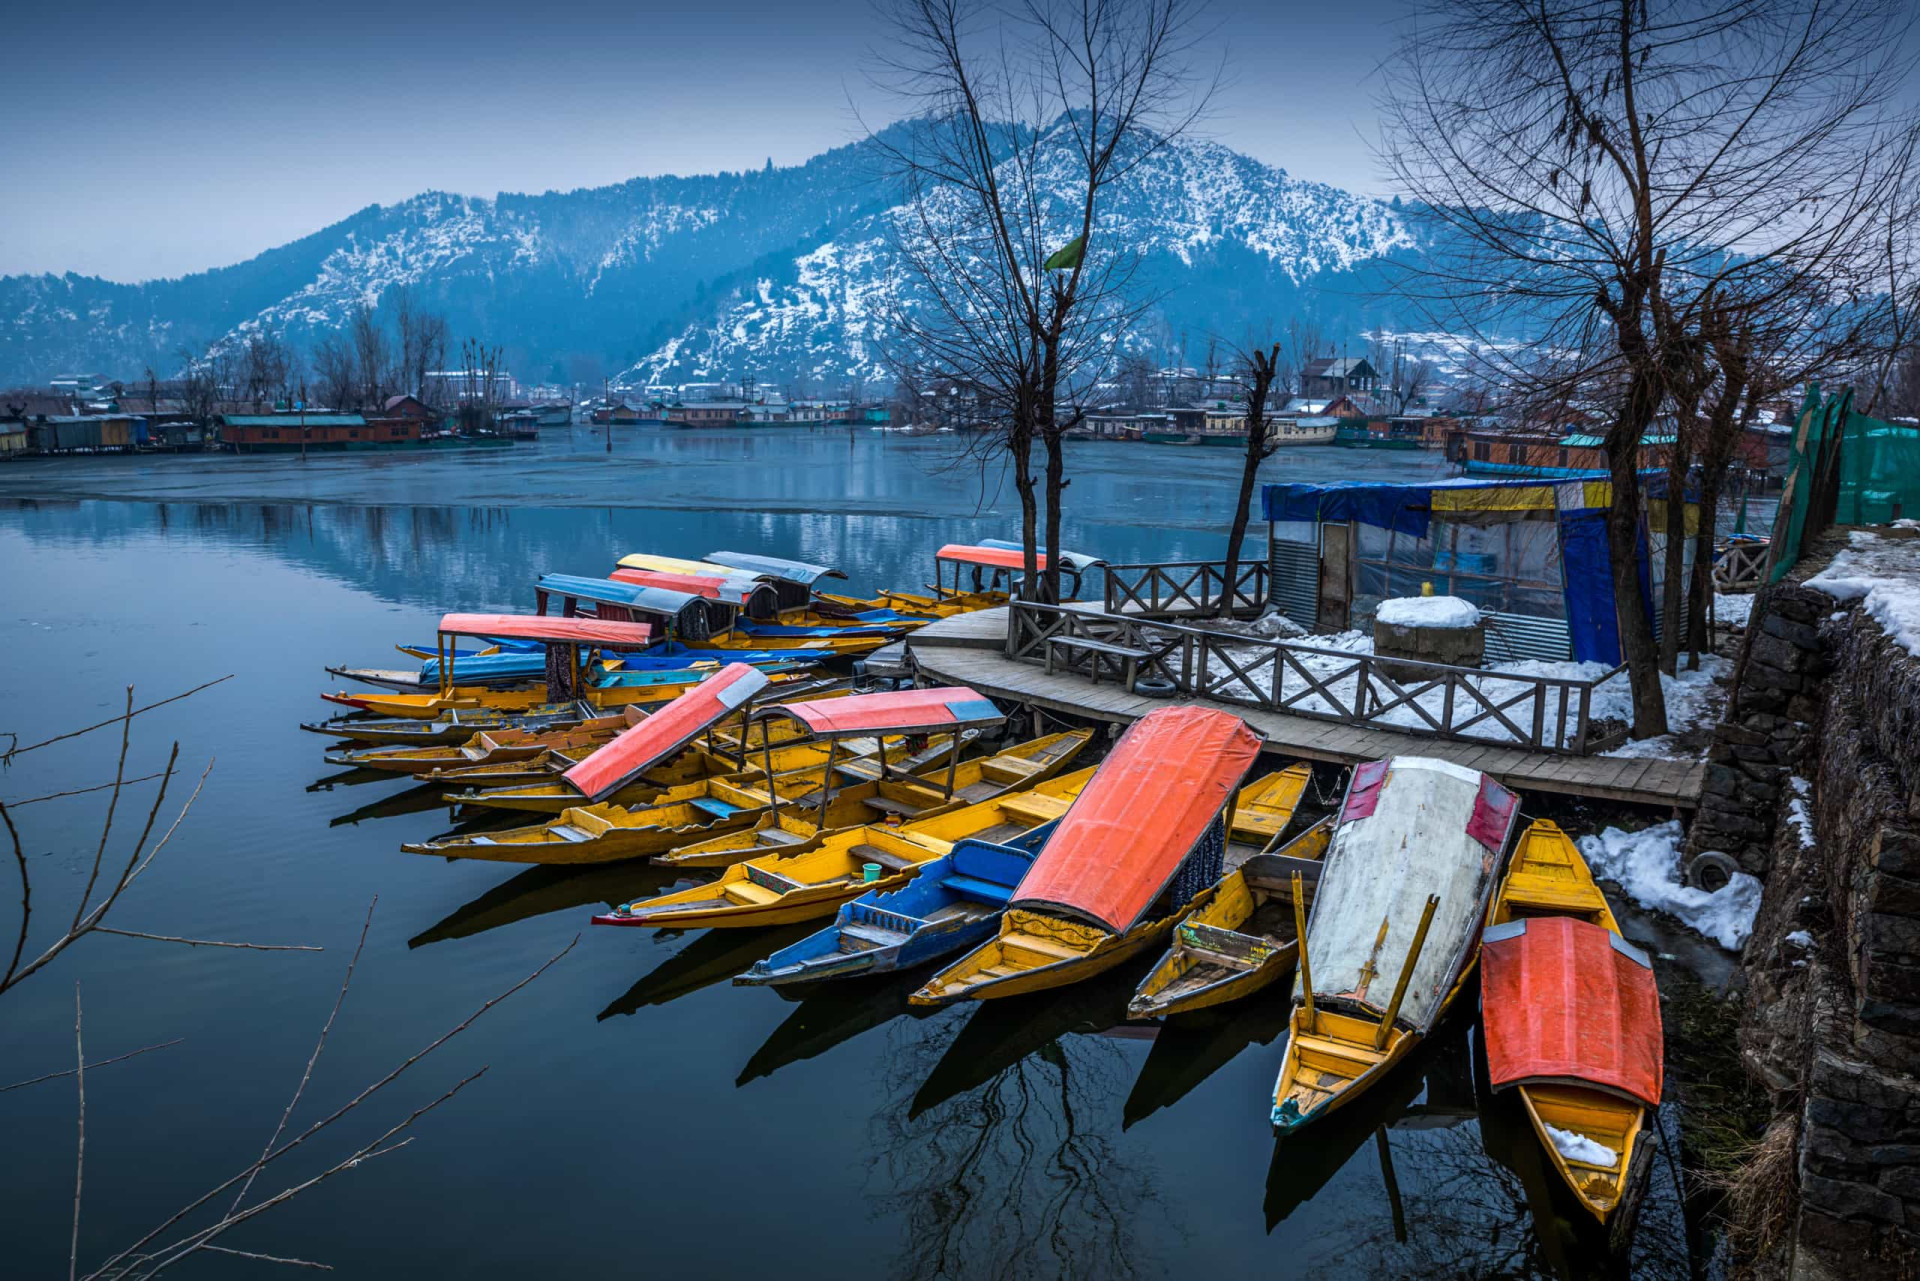 <p>Set on the banks of the Jhelum River, Srinagar boasts an enchanting location. The capital of Jammu and Kashmir, Srinagar is surrounded by a collection of dazzling lakes, on which dozens of colorful houseboats are moored. The destination is also renowned for its splendid tulip garden and traditional Kashmiri handicrafts.</p><p>You may also like:<a href="https://www.starsinsider.com/n/346080?utm_source=msn.com&utm_medium=display&utm_campaign=referral_description&utm_content=470081v2en-en"> Riches to rags: celebs who died broke </a></p>